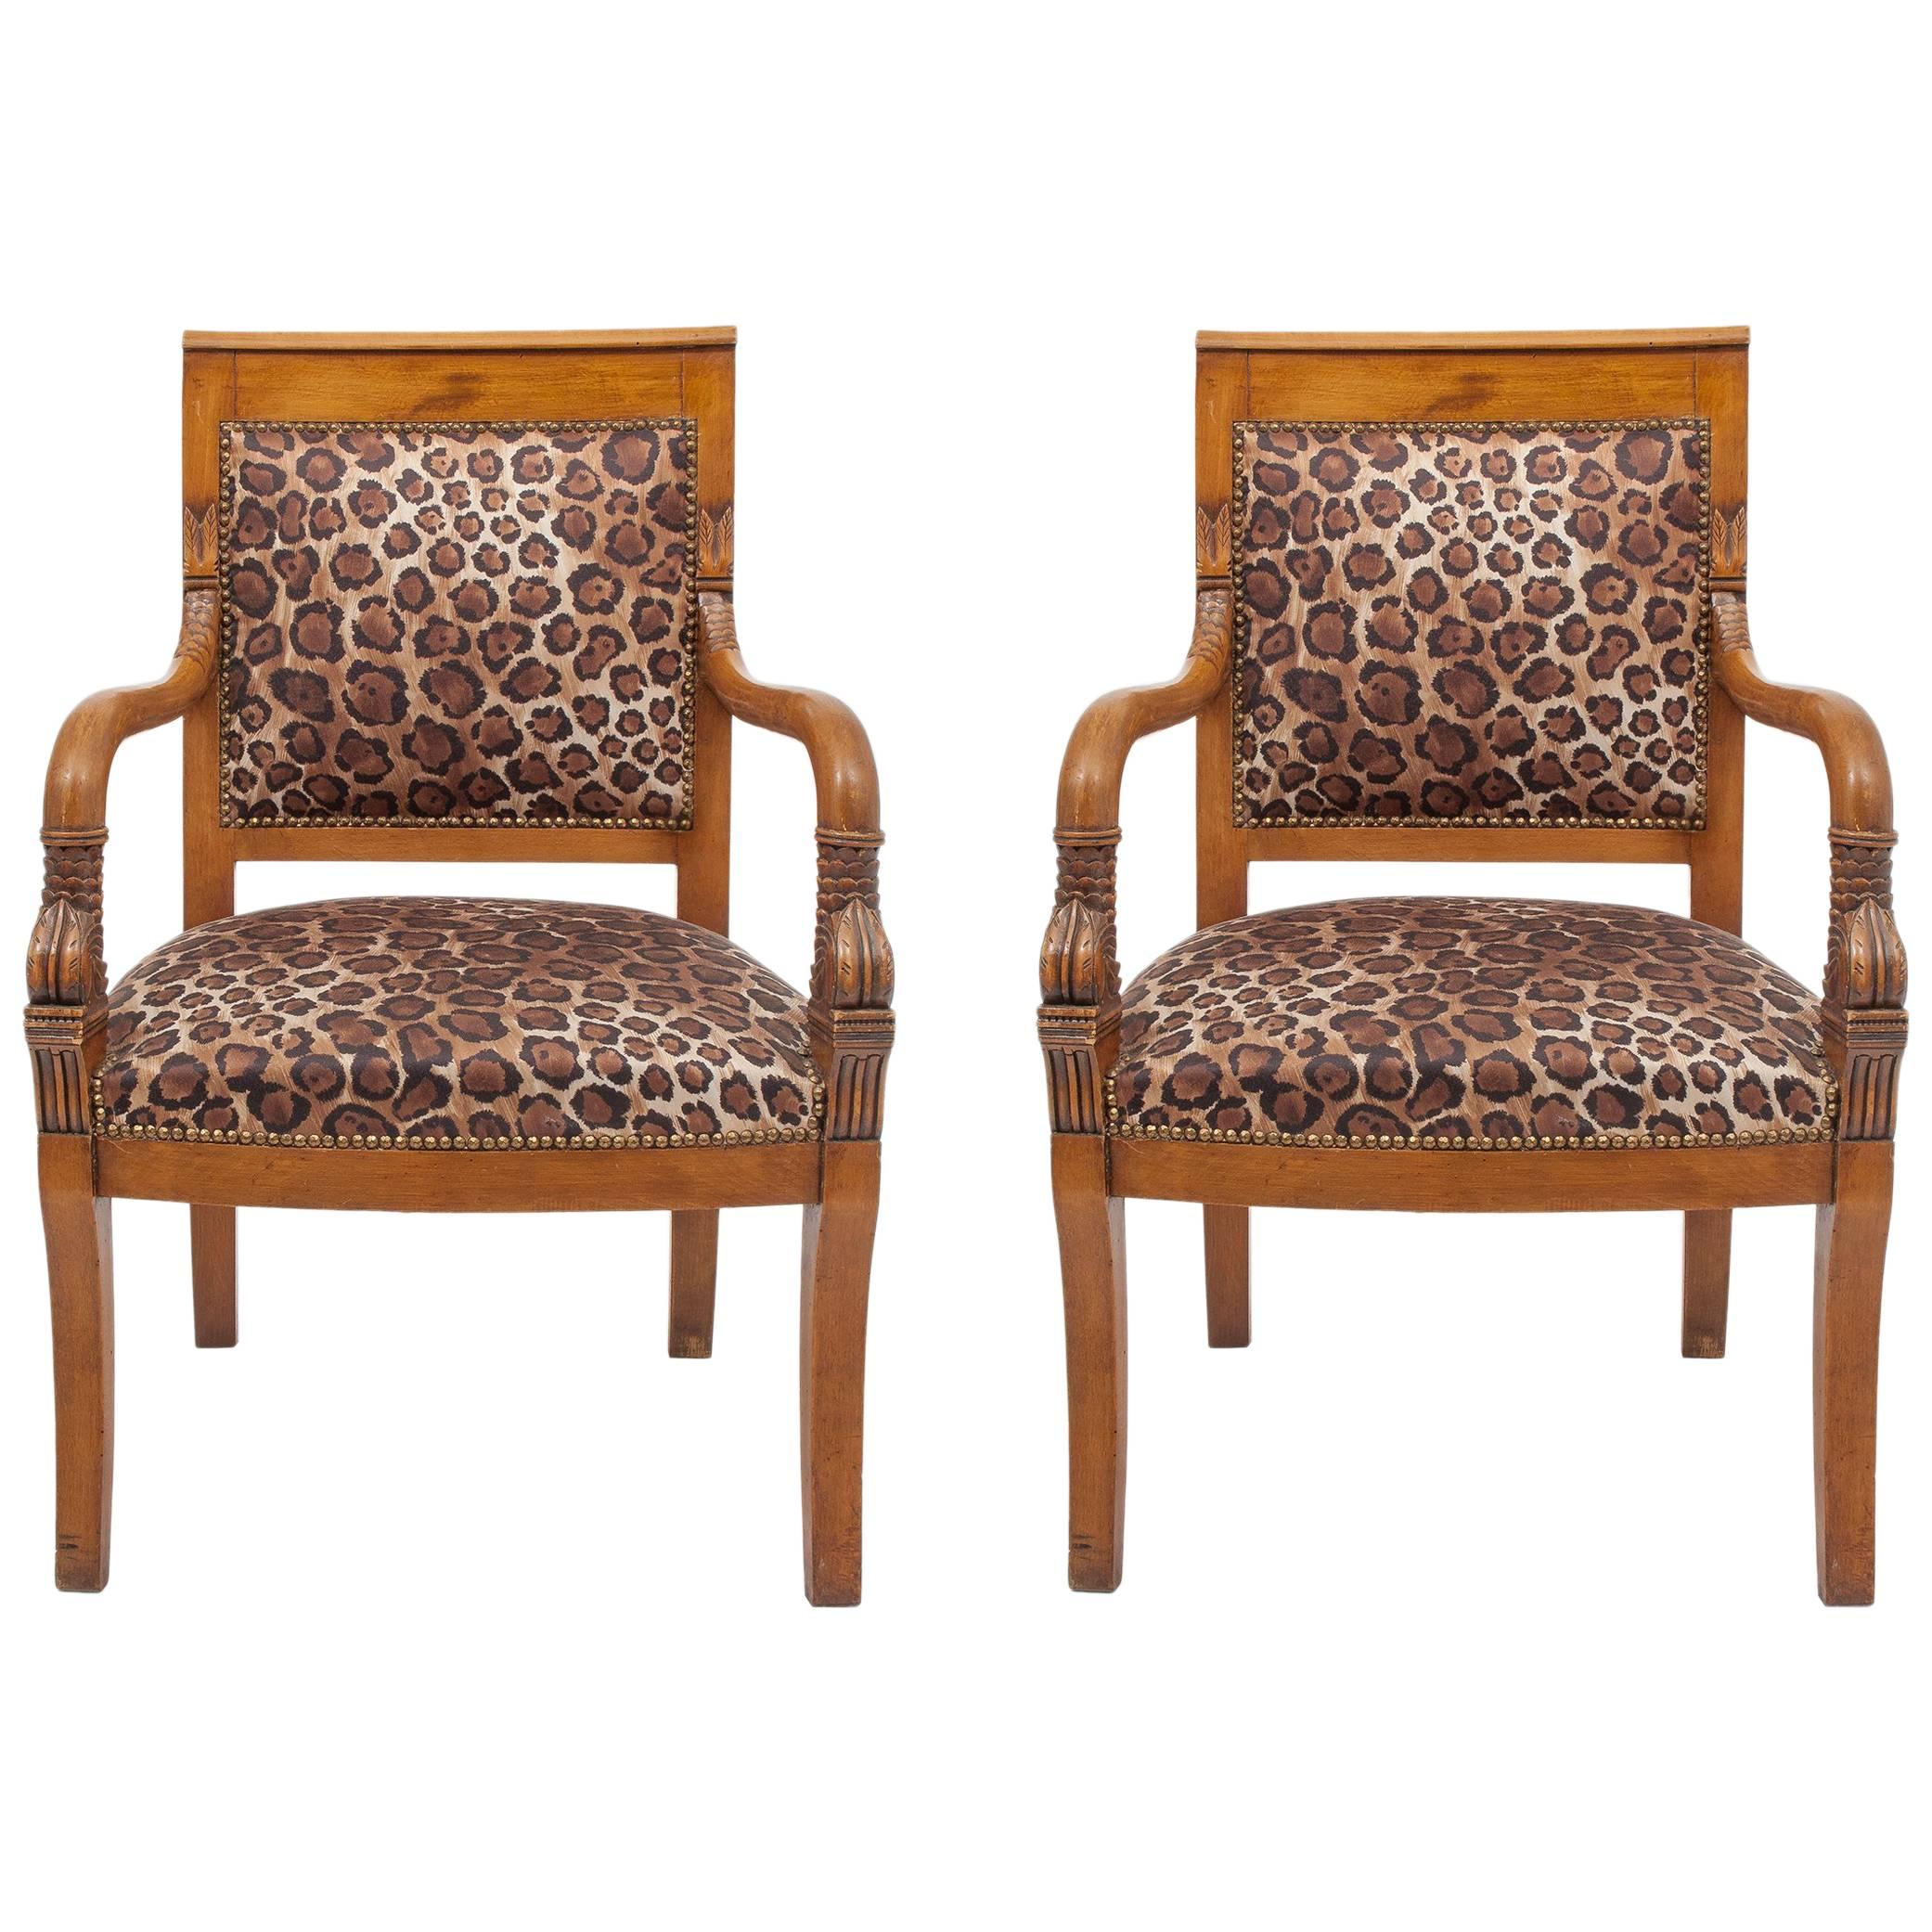  Club or Library Chairs Pair, Covered in "Leopard" Fabric